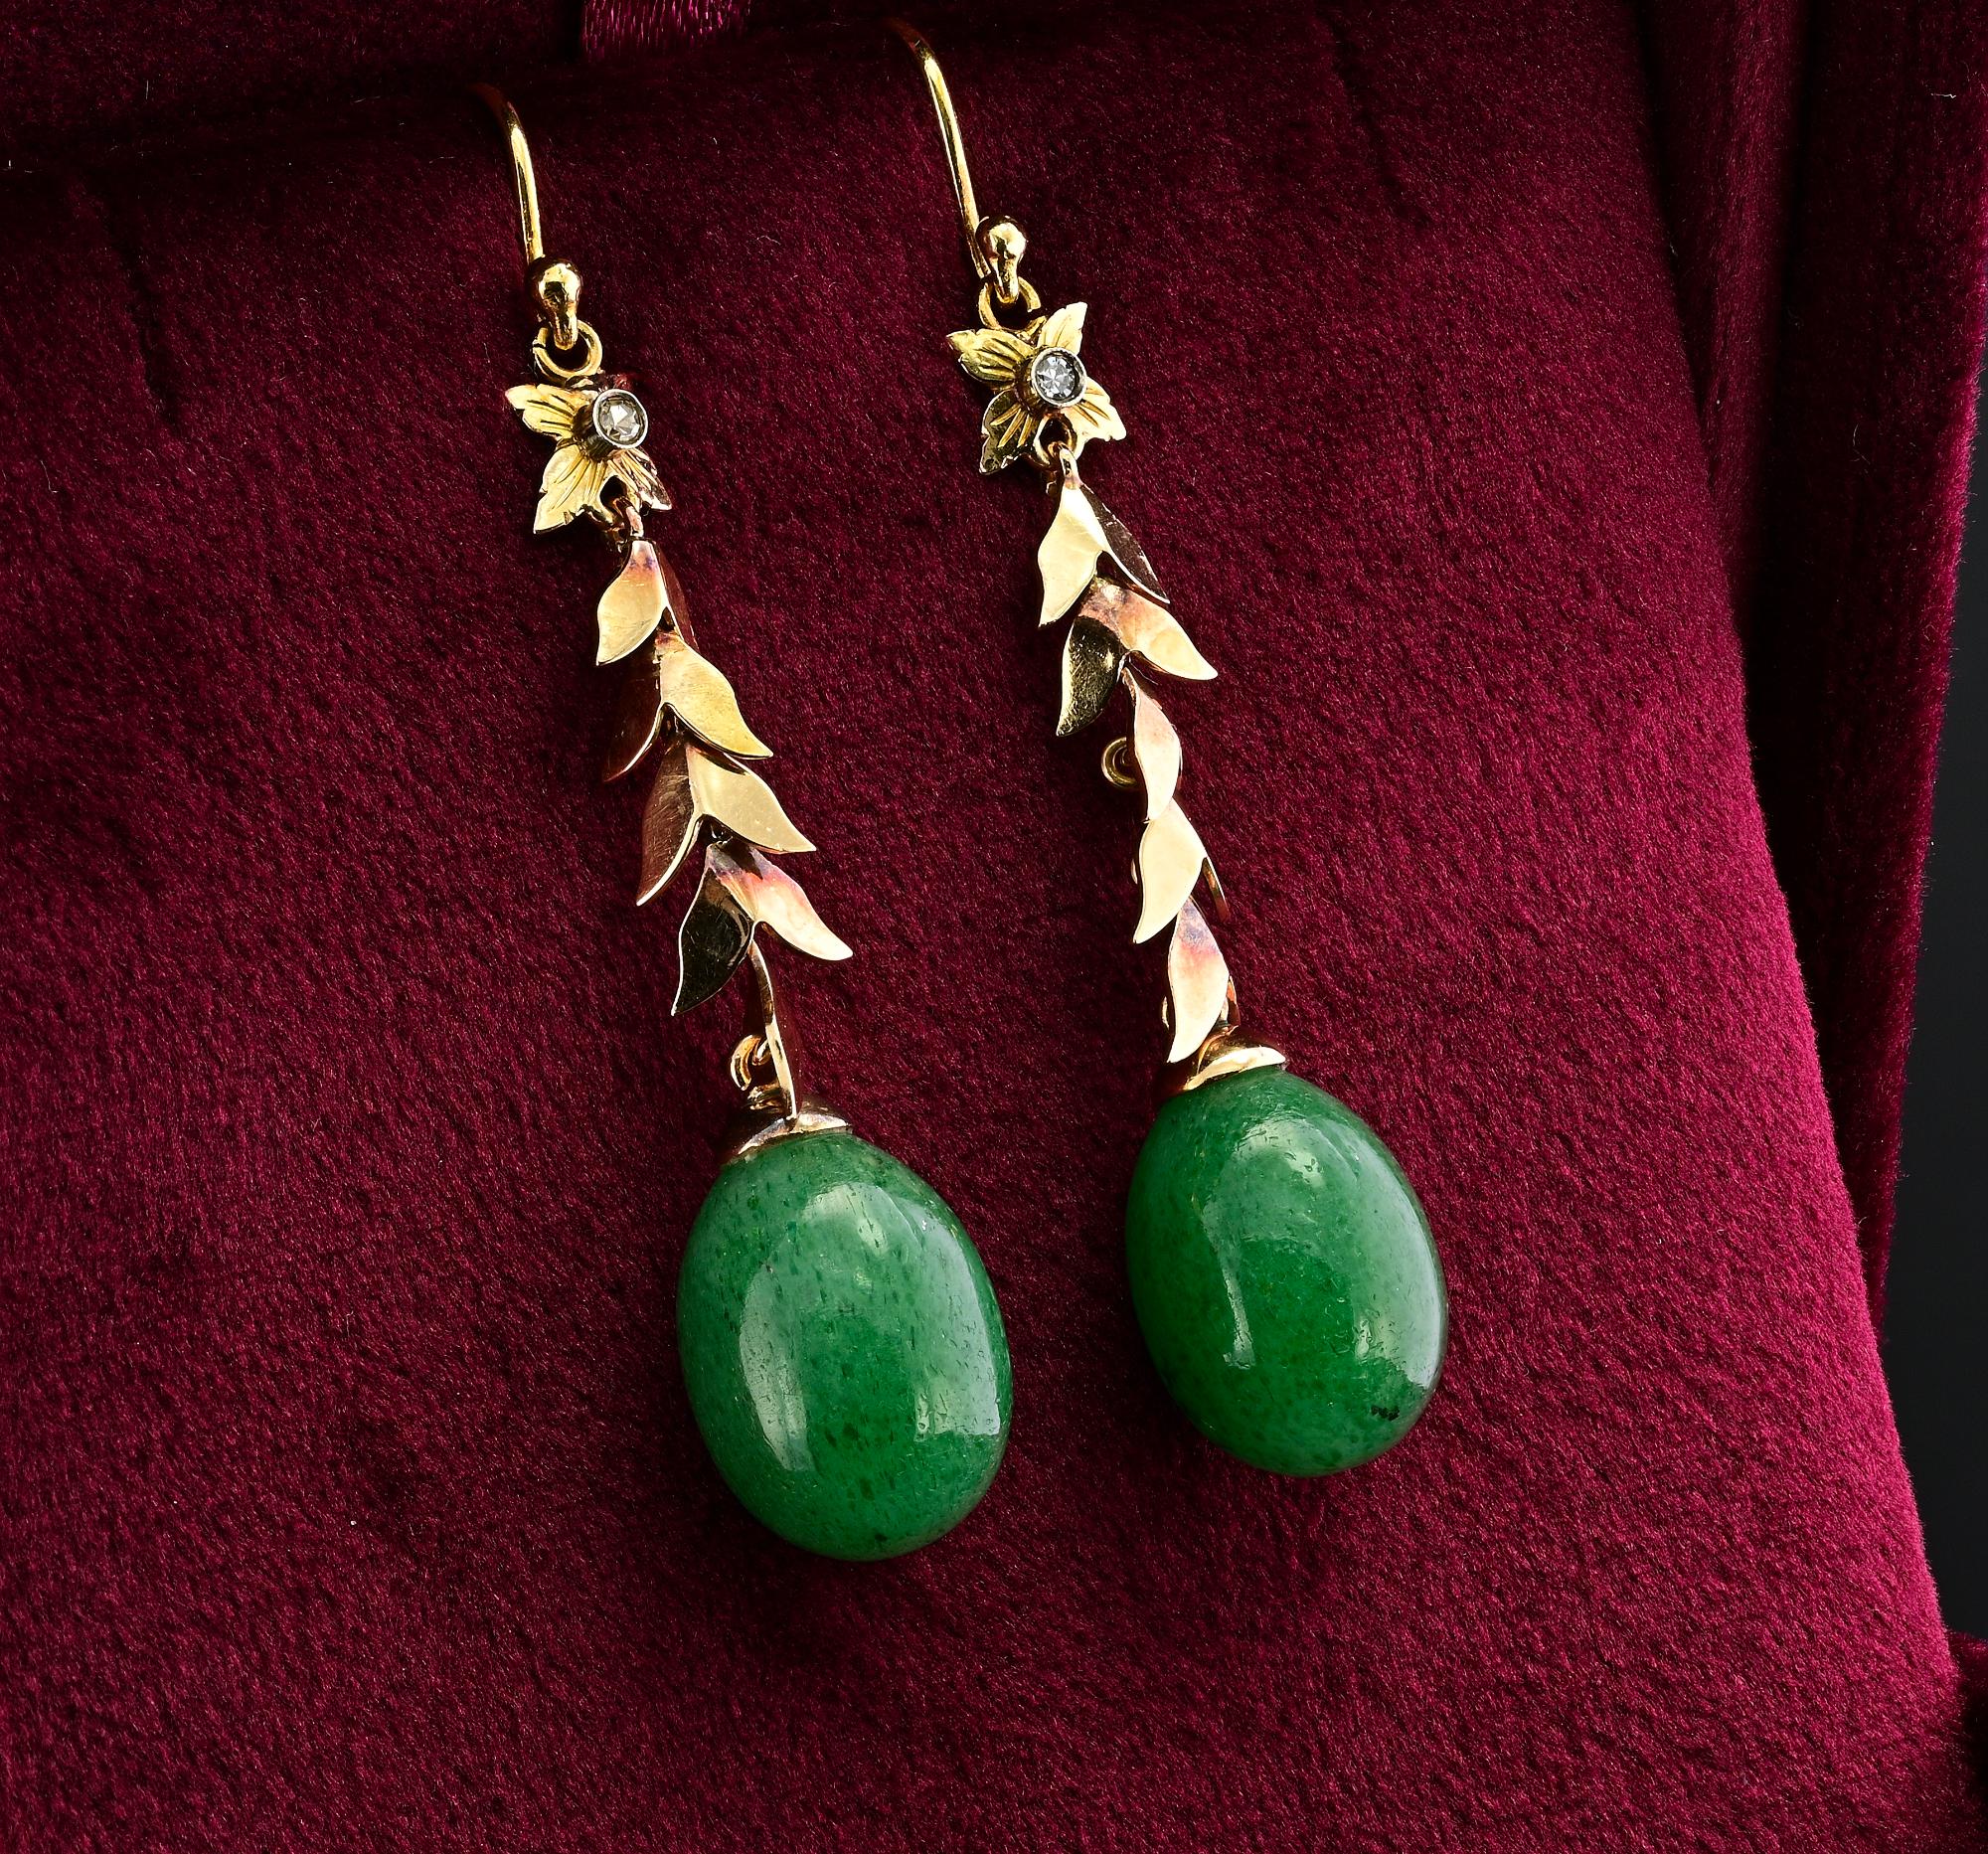 Vintage 32.0 Ct Green Aventurine Diamond Drop Earrings 18 KT In Good Condition For Sale In Napoli, IT